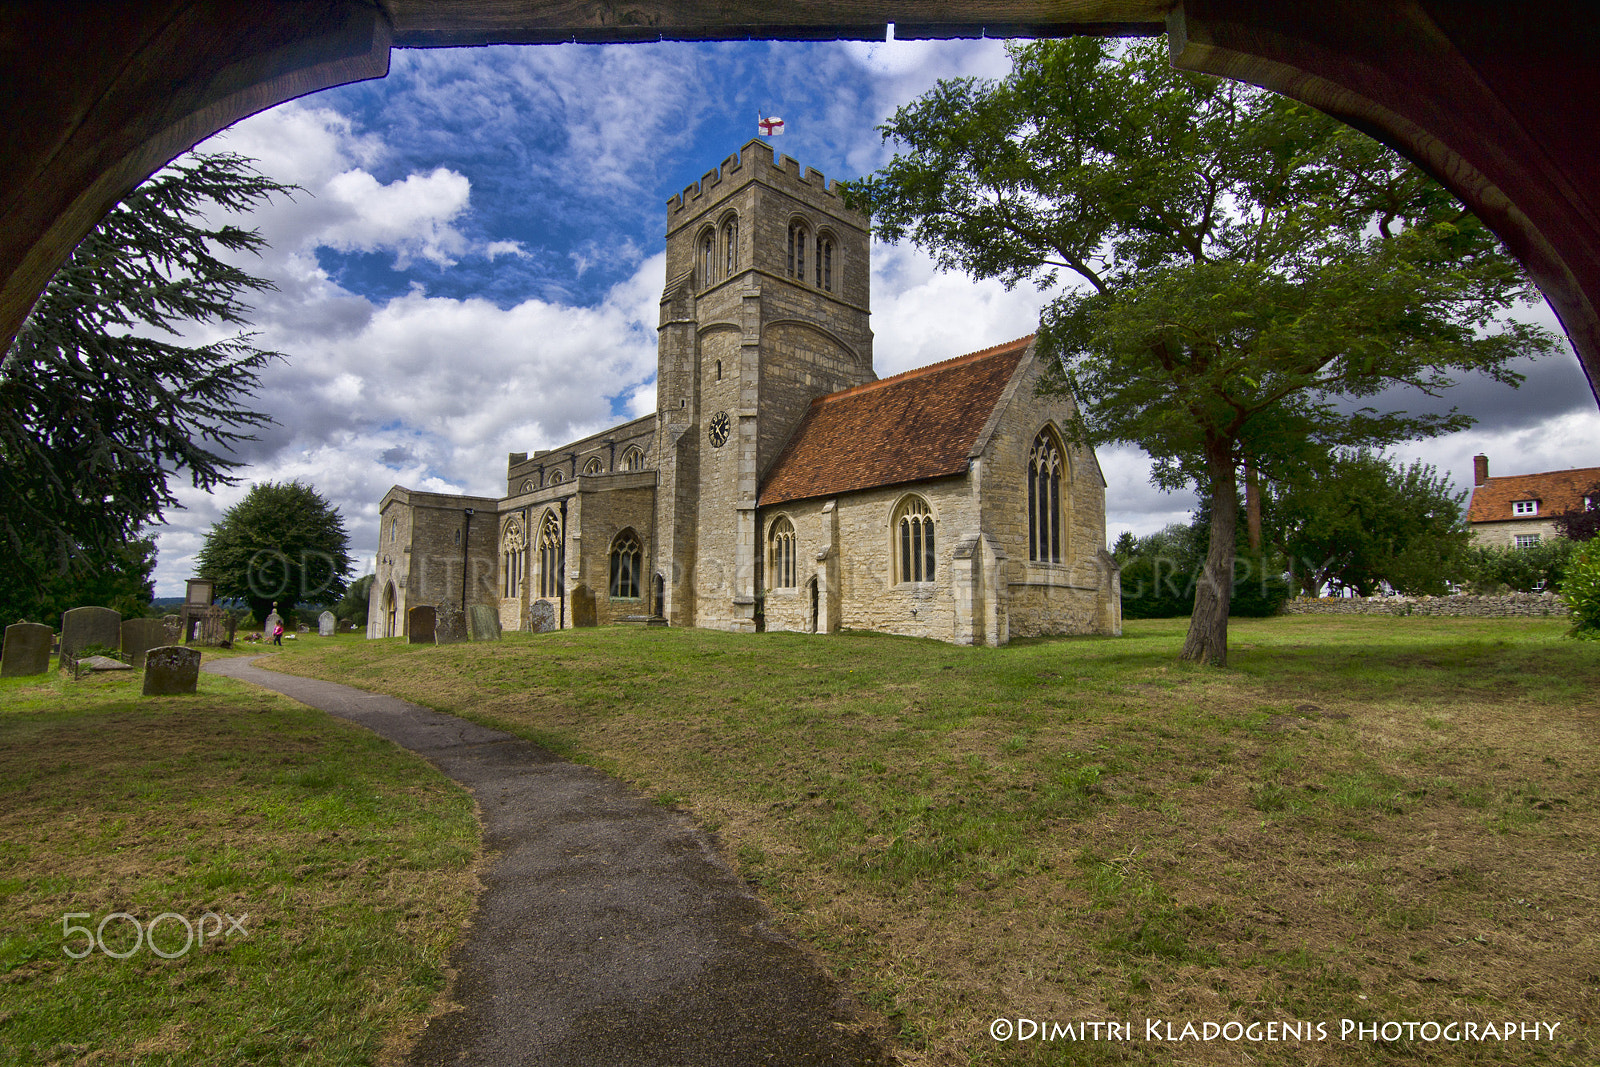 20mm F2.8 sample photo. Old cathedral photography